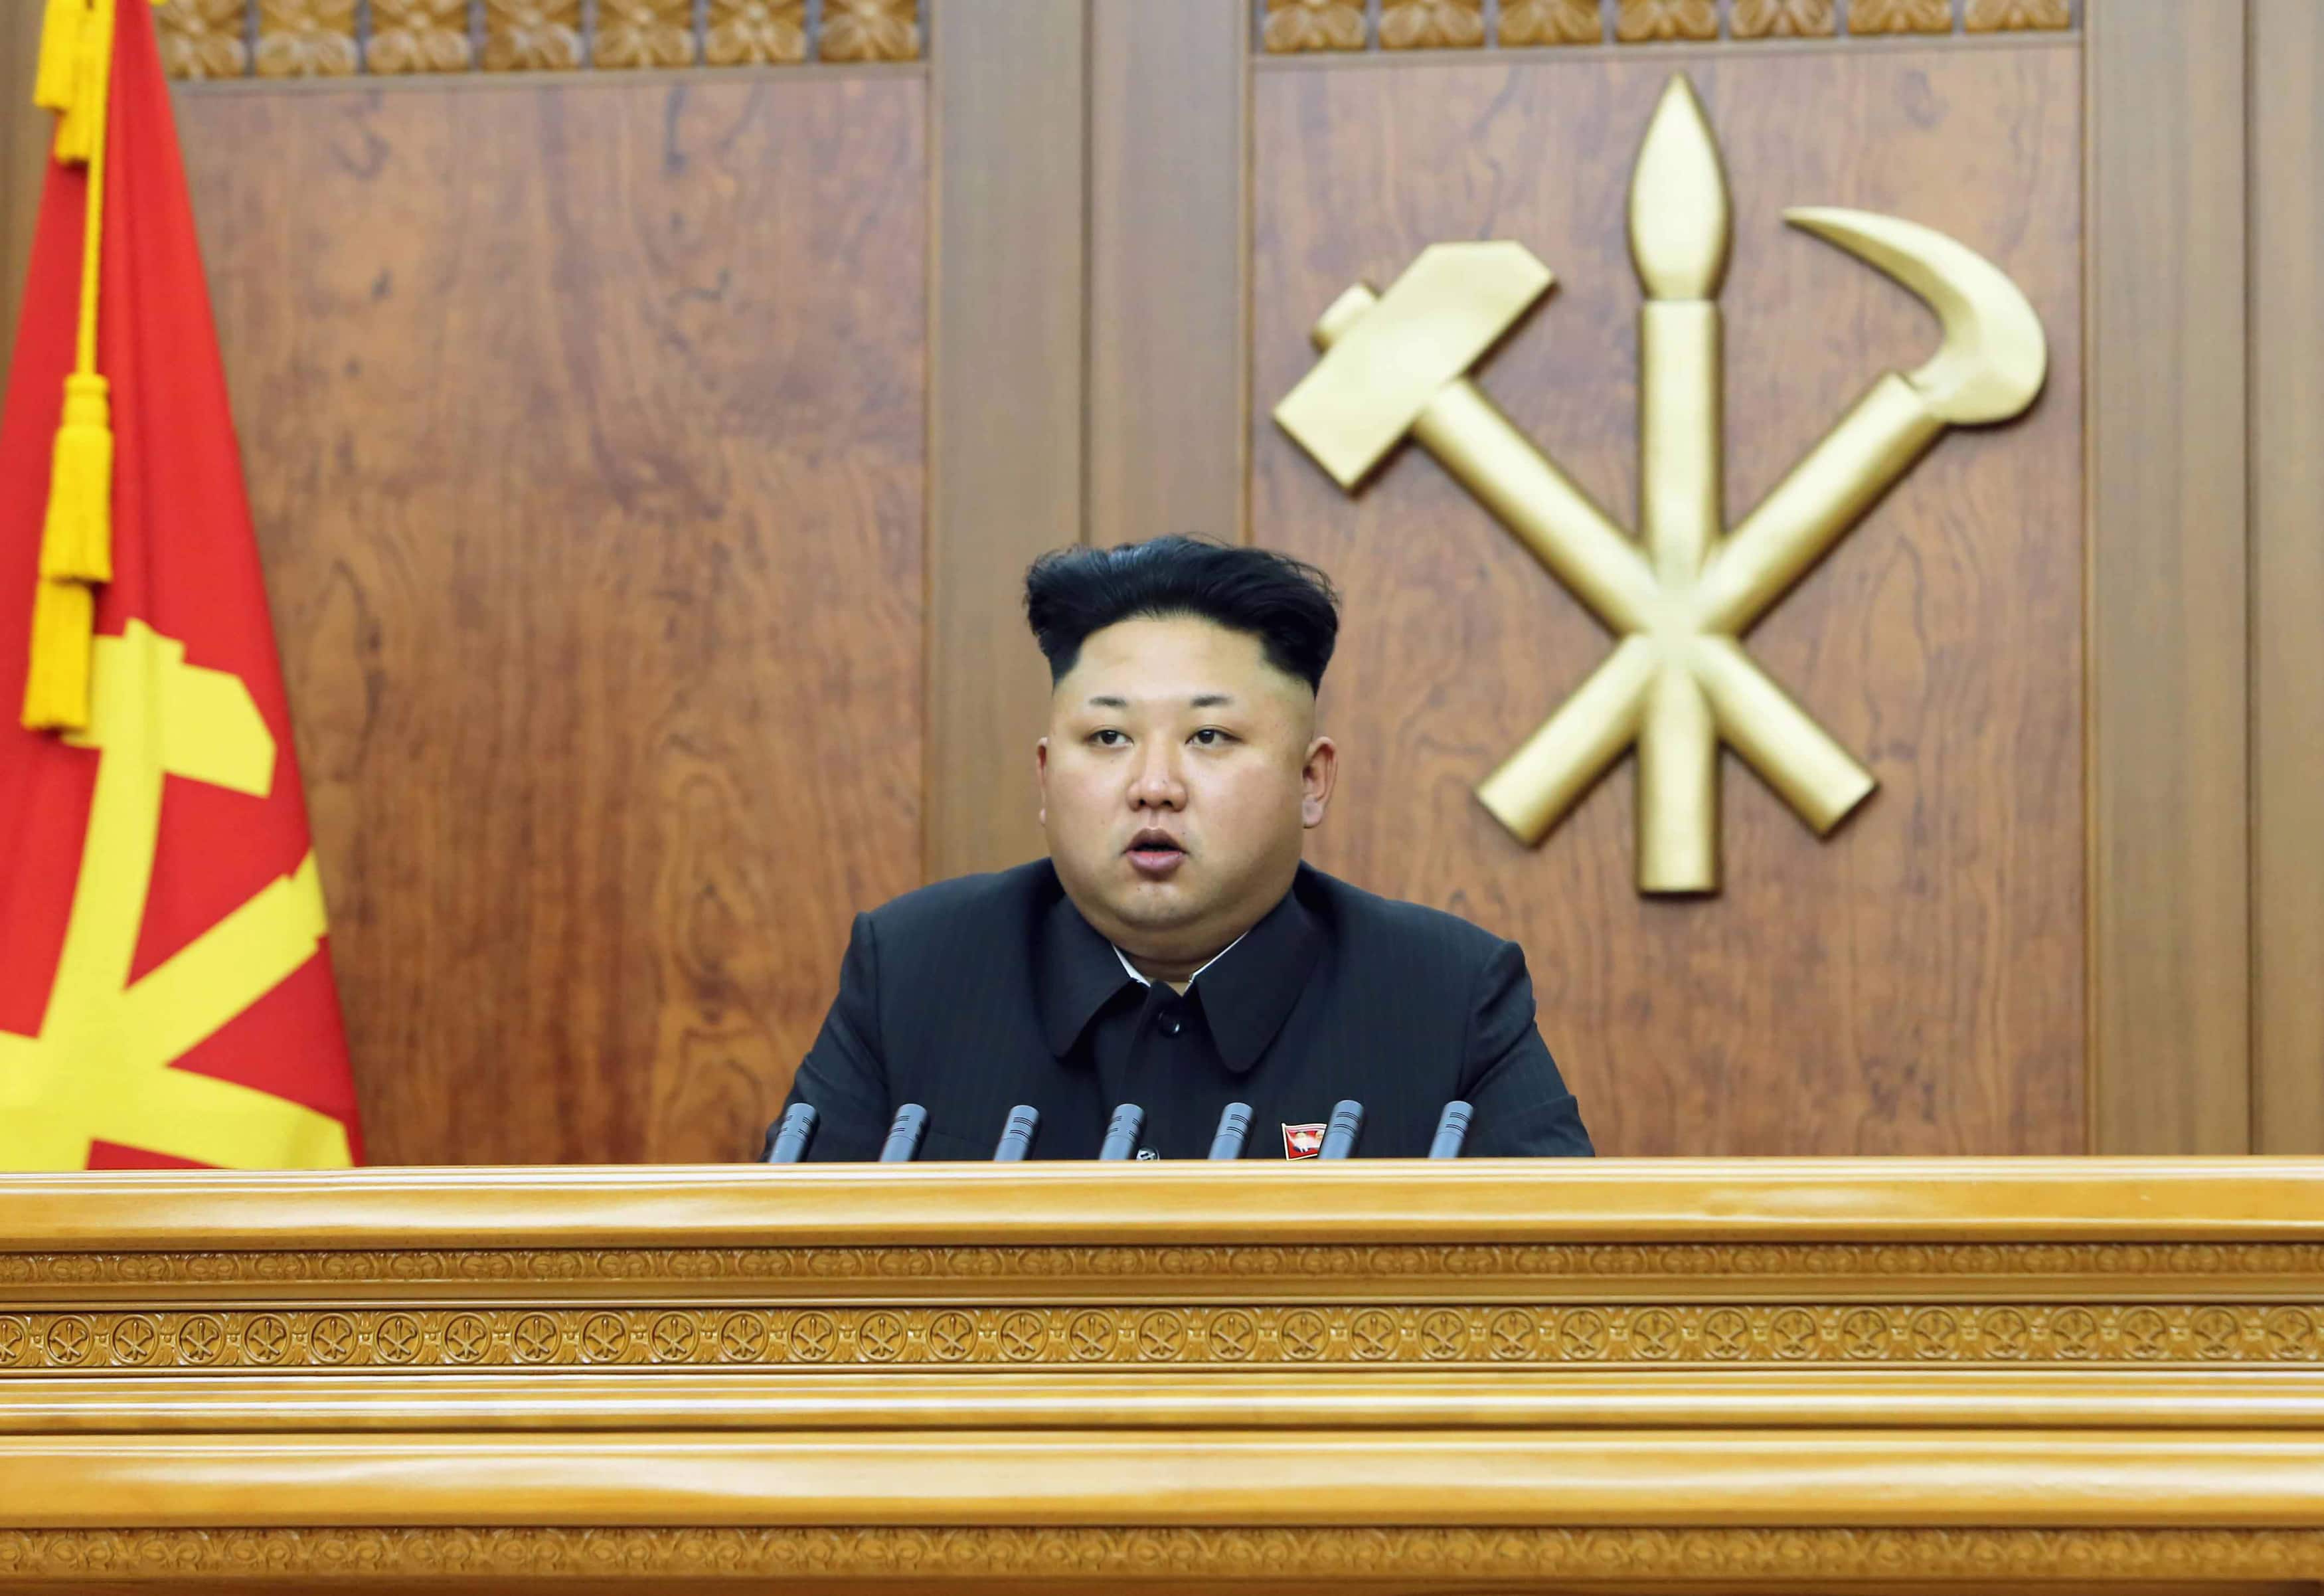 North Korean leader Kim Jong Un delivers a New Year's address in this January 1, 2015 photo released by North Korea's Korean Central News Agency (KCNA) in Pyongyang, REUTERS/KCNA